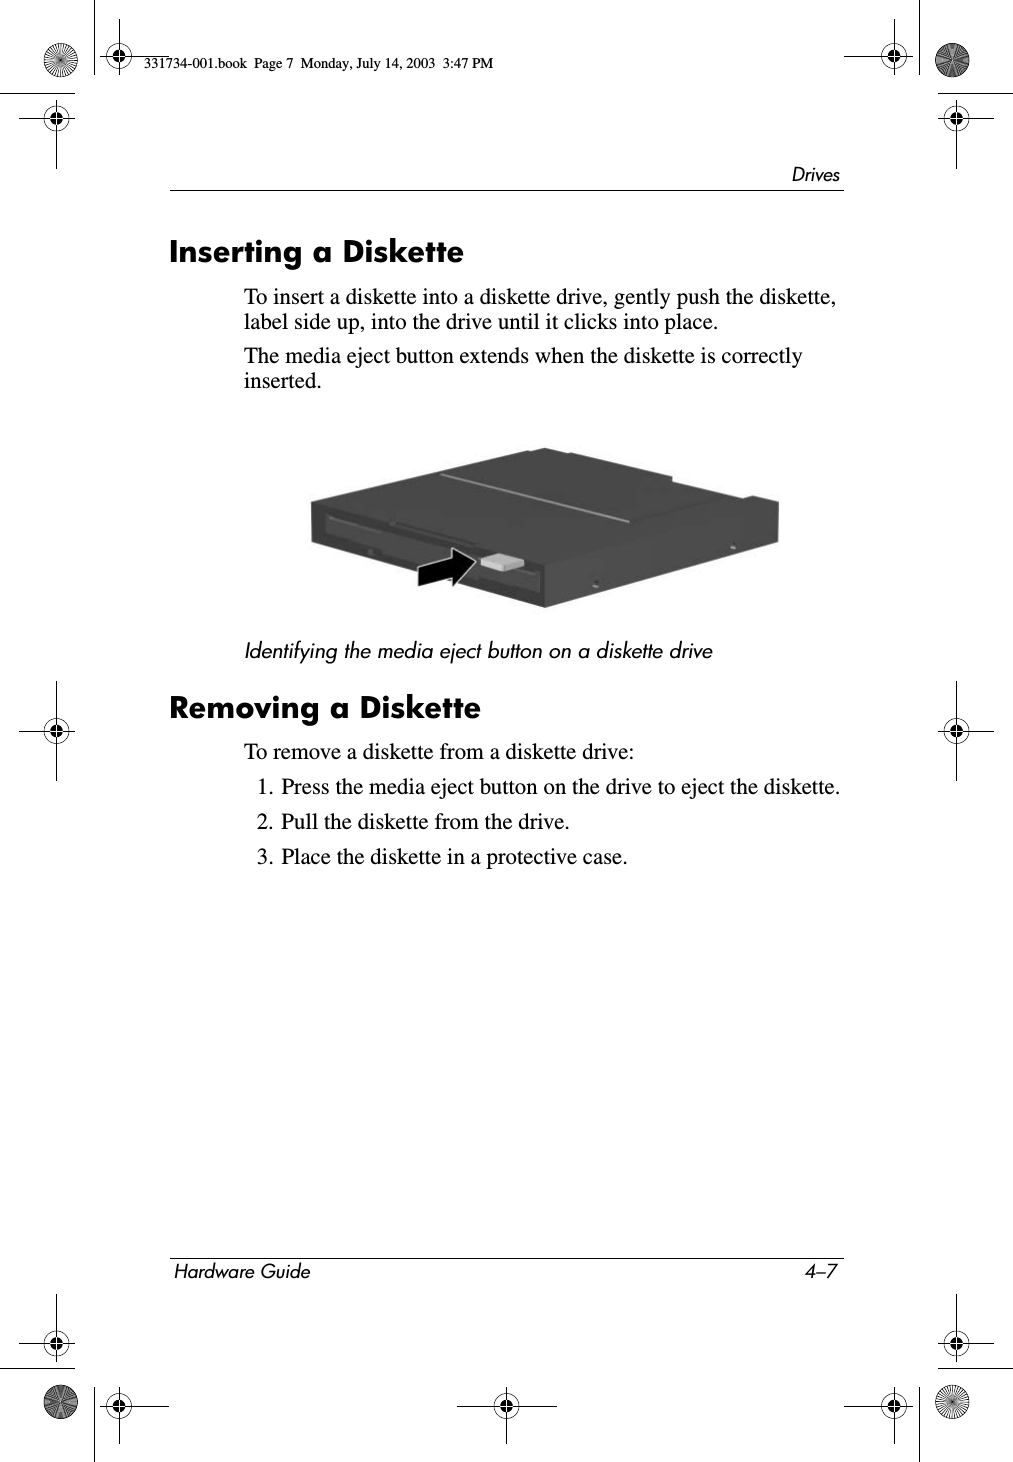 DrivesHardware Guide 4–7Inserting a DisketteTo insert a diskette into a diskette drive, gently push the diskette, label side up, into the drive until it clicks into place.The media eject button extends when the diskette is correctly inserted.Identifying the media eject button on a diskette driveRemoving a DisketteTo remove a diskette from a diskette drive:1. Press the media eject button on the drive to eject the diskette.2. Pull the diskette from the drive.3. Place the diskette in a protective case.331734-001.book  Page 7  Monday, July 14, 2003  3:47 PM